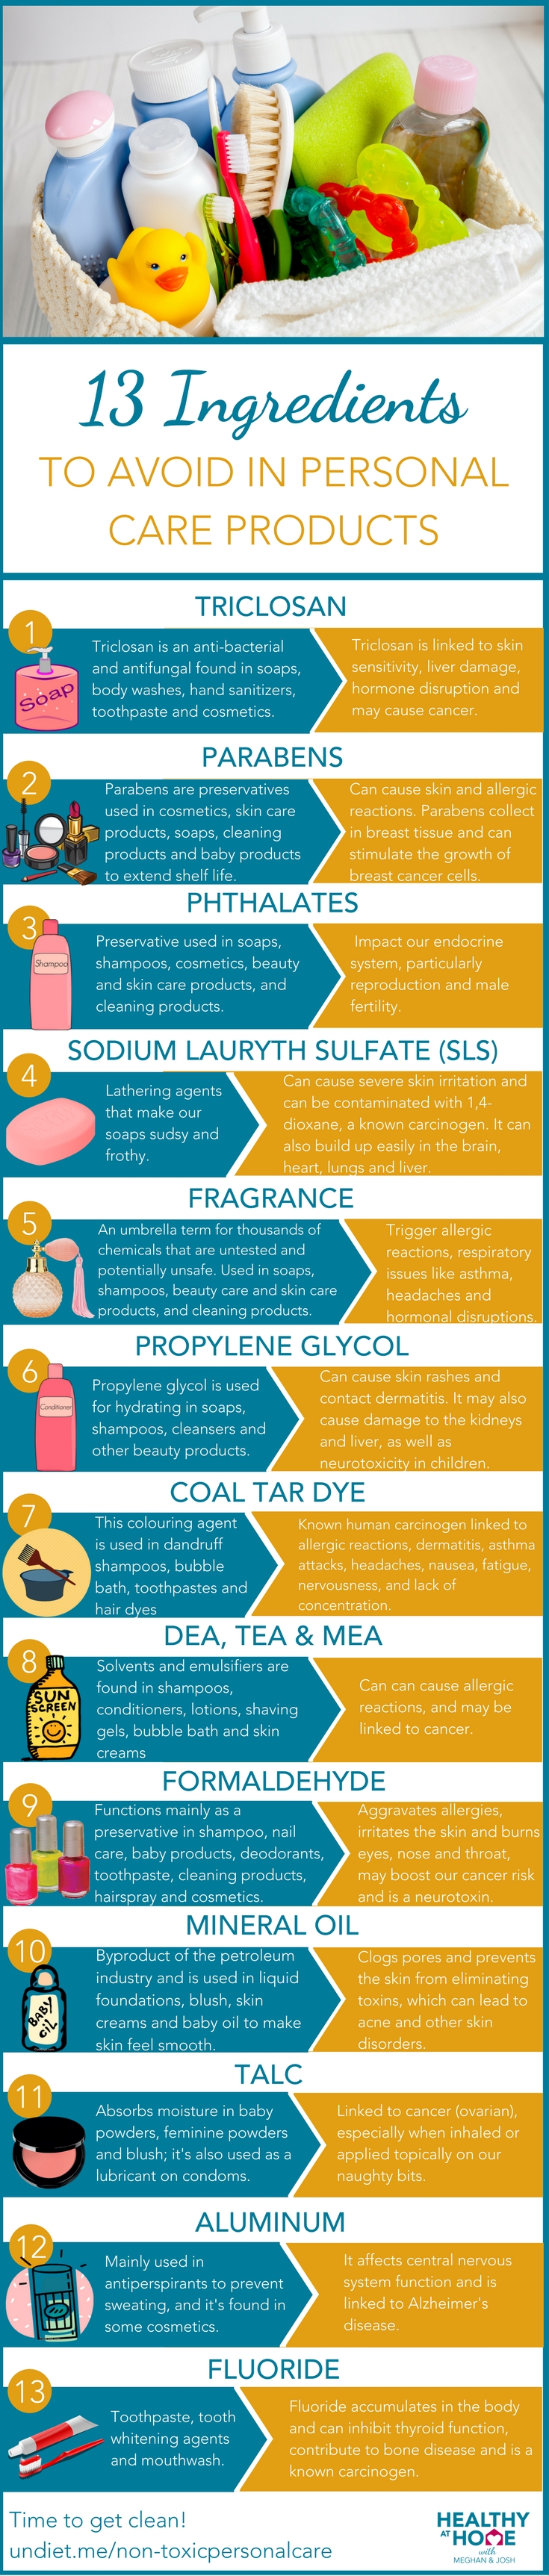 13 Ingredients To Avoid n Personal Care Products